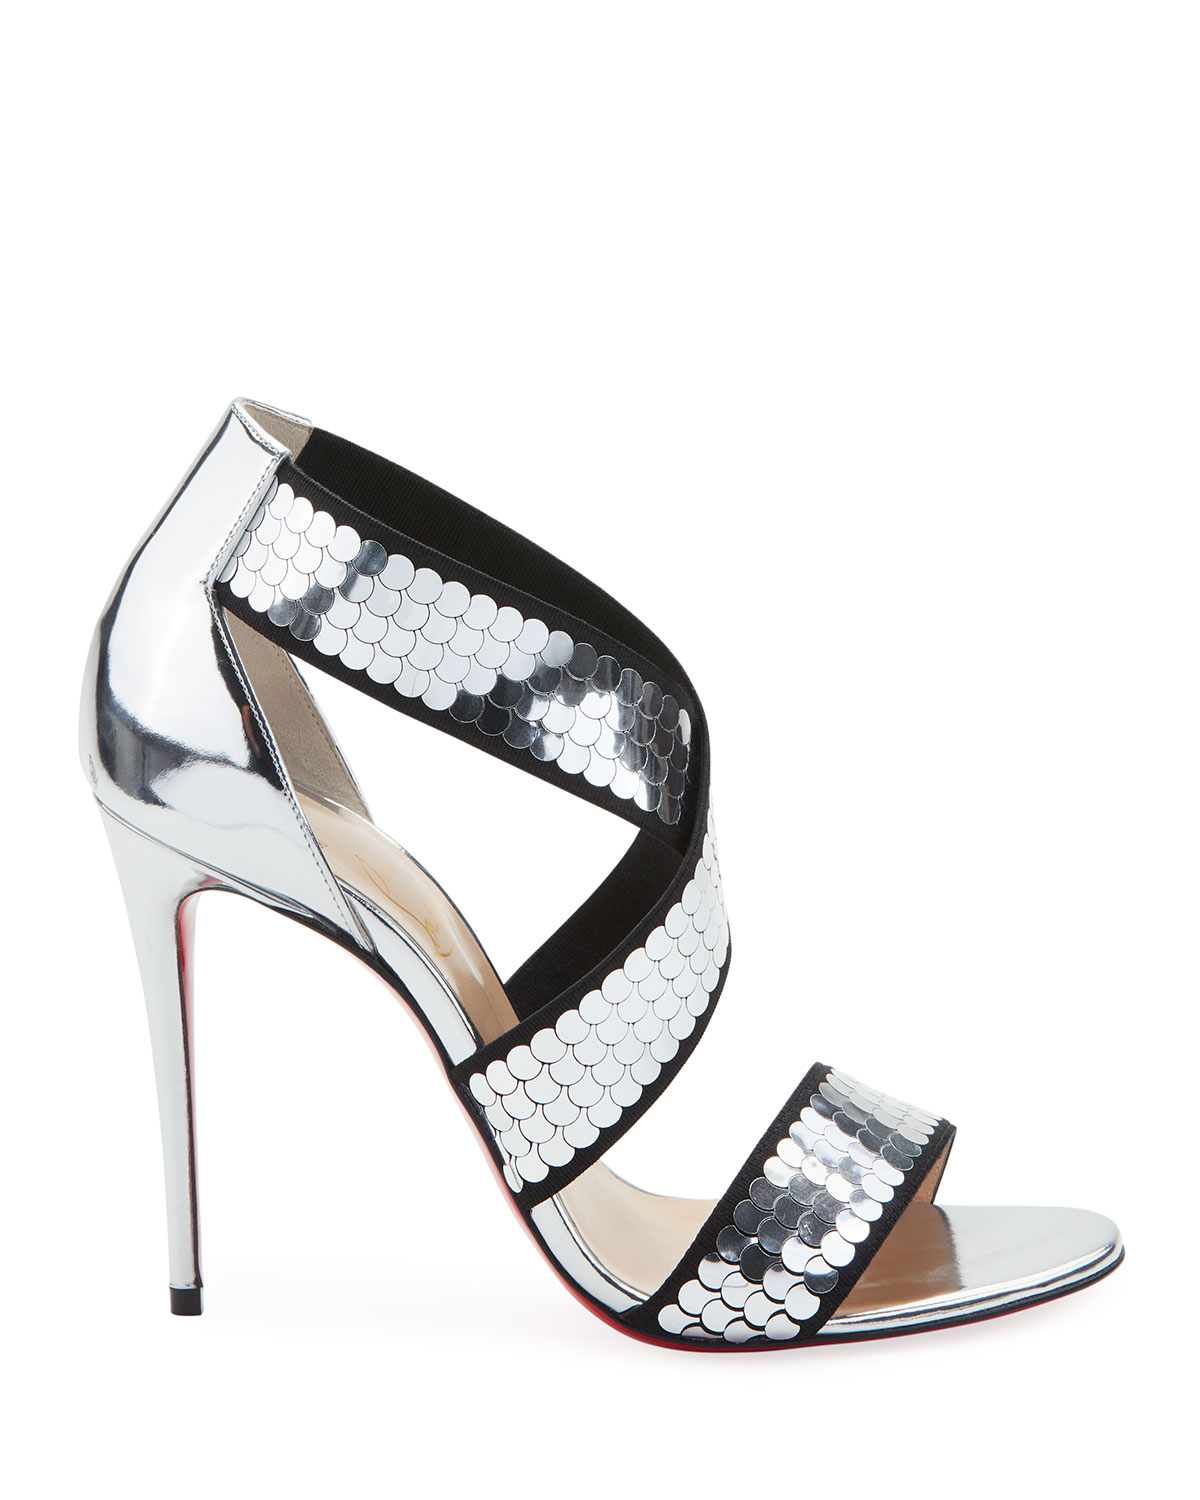 Christian Louboutin Black/Silver Sequins Fabric and Leather Xili Disco  Sandals Size 38 Christian Louboutin